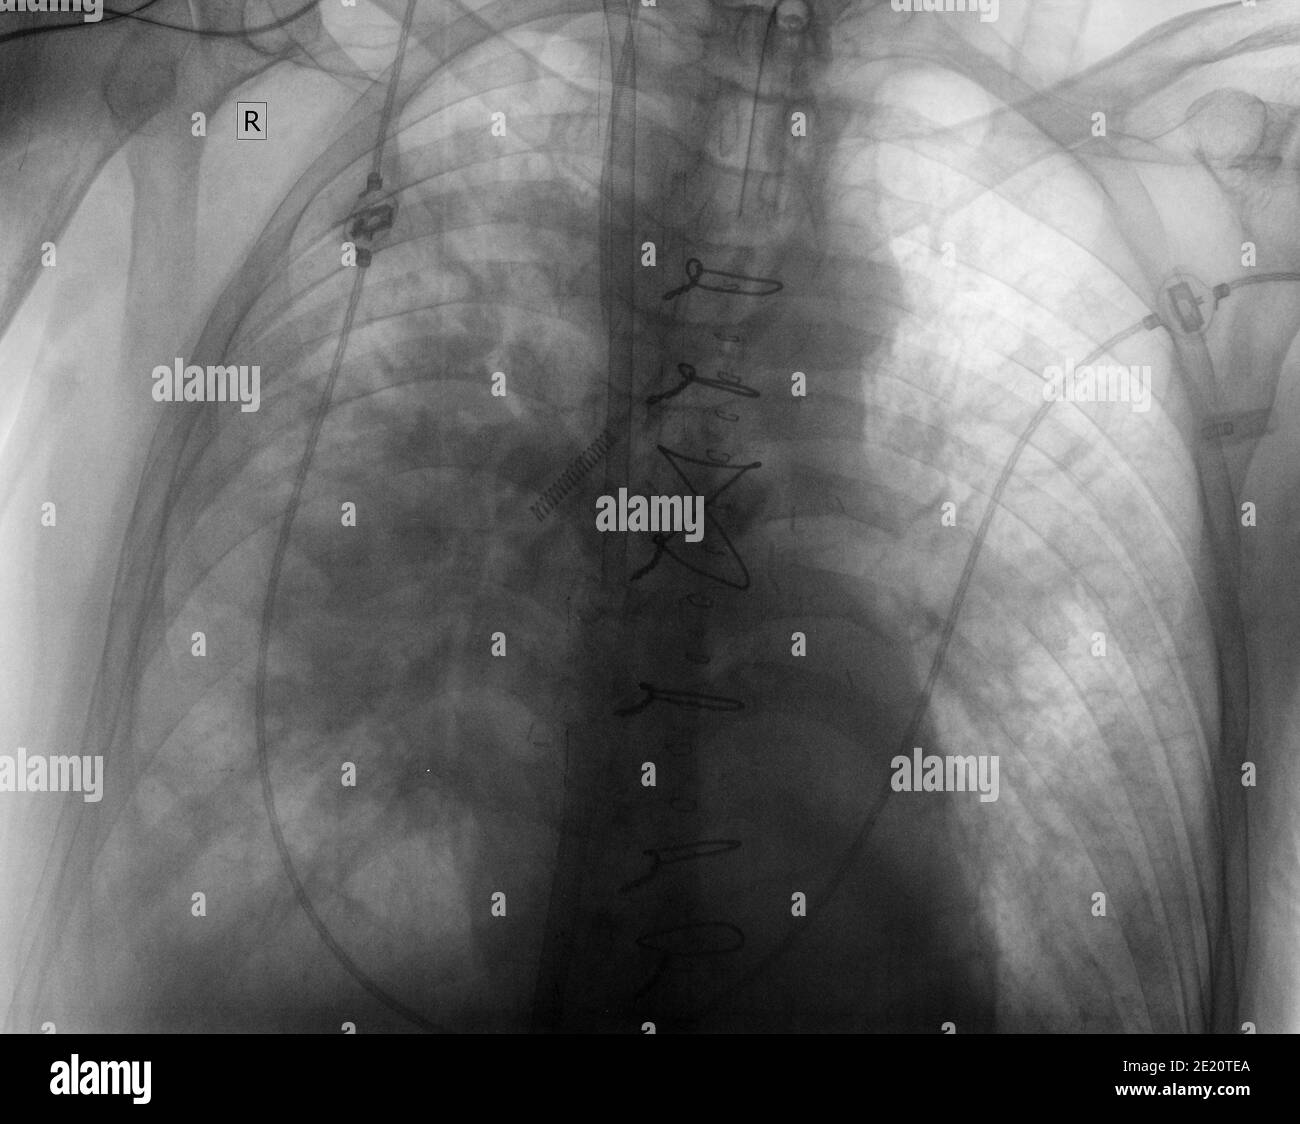 X-ray image of a patient with pneumonia. Stock Photo